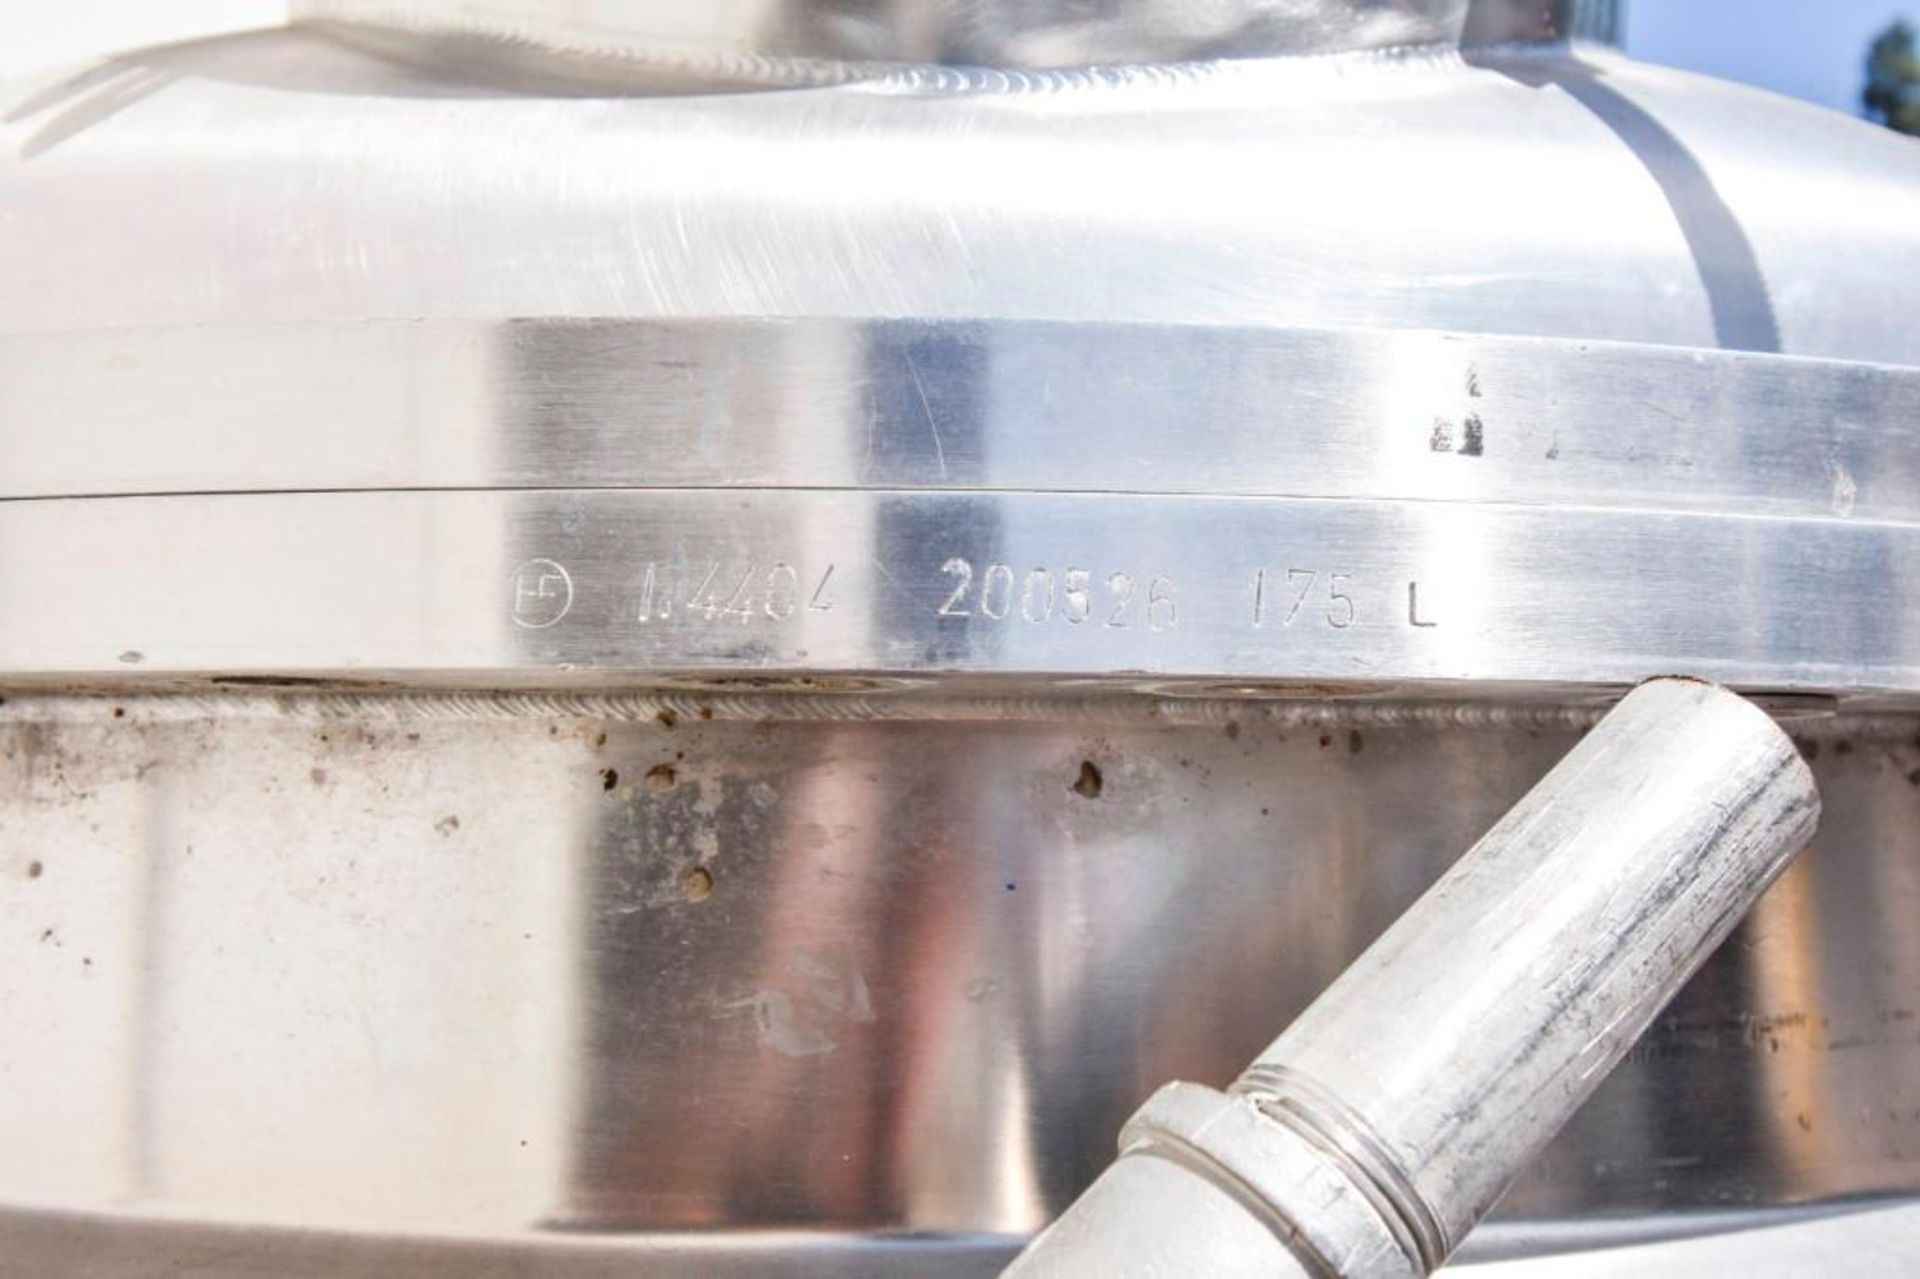 Pharma-Palung Analagen Stainless Steel Tank - Image 11 of 26